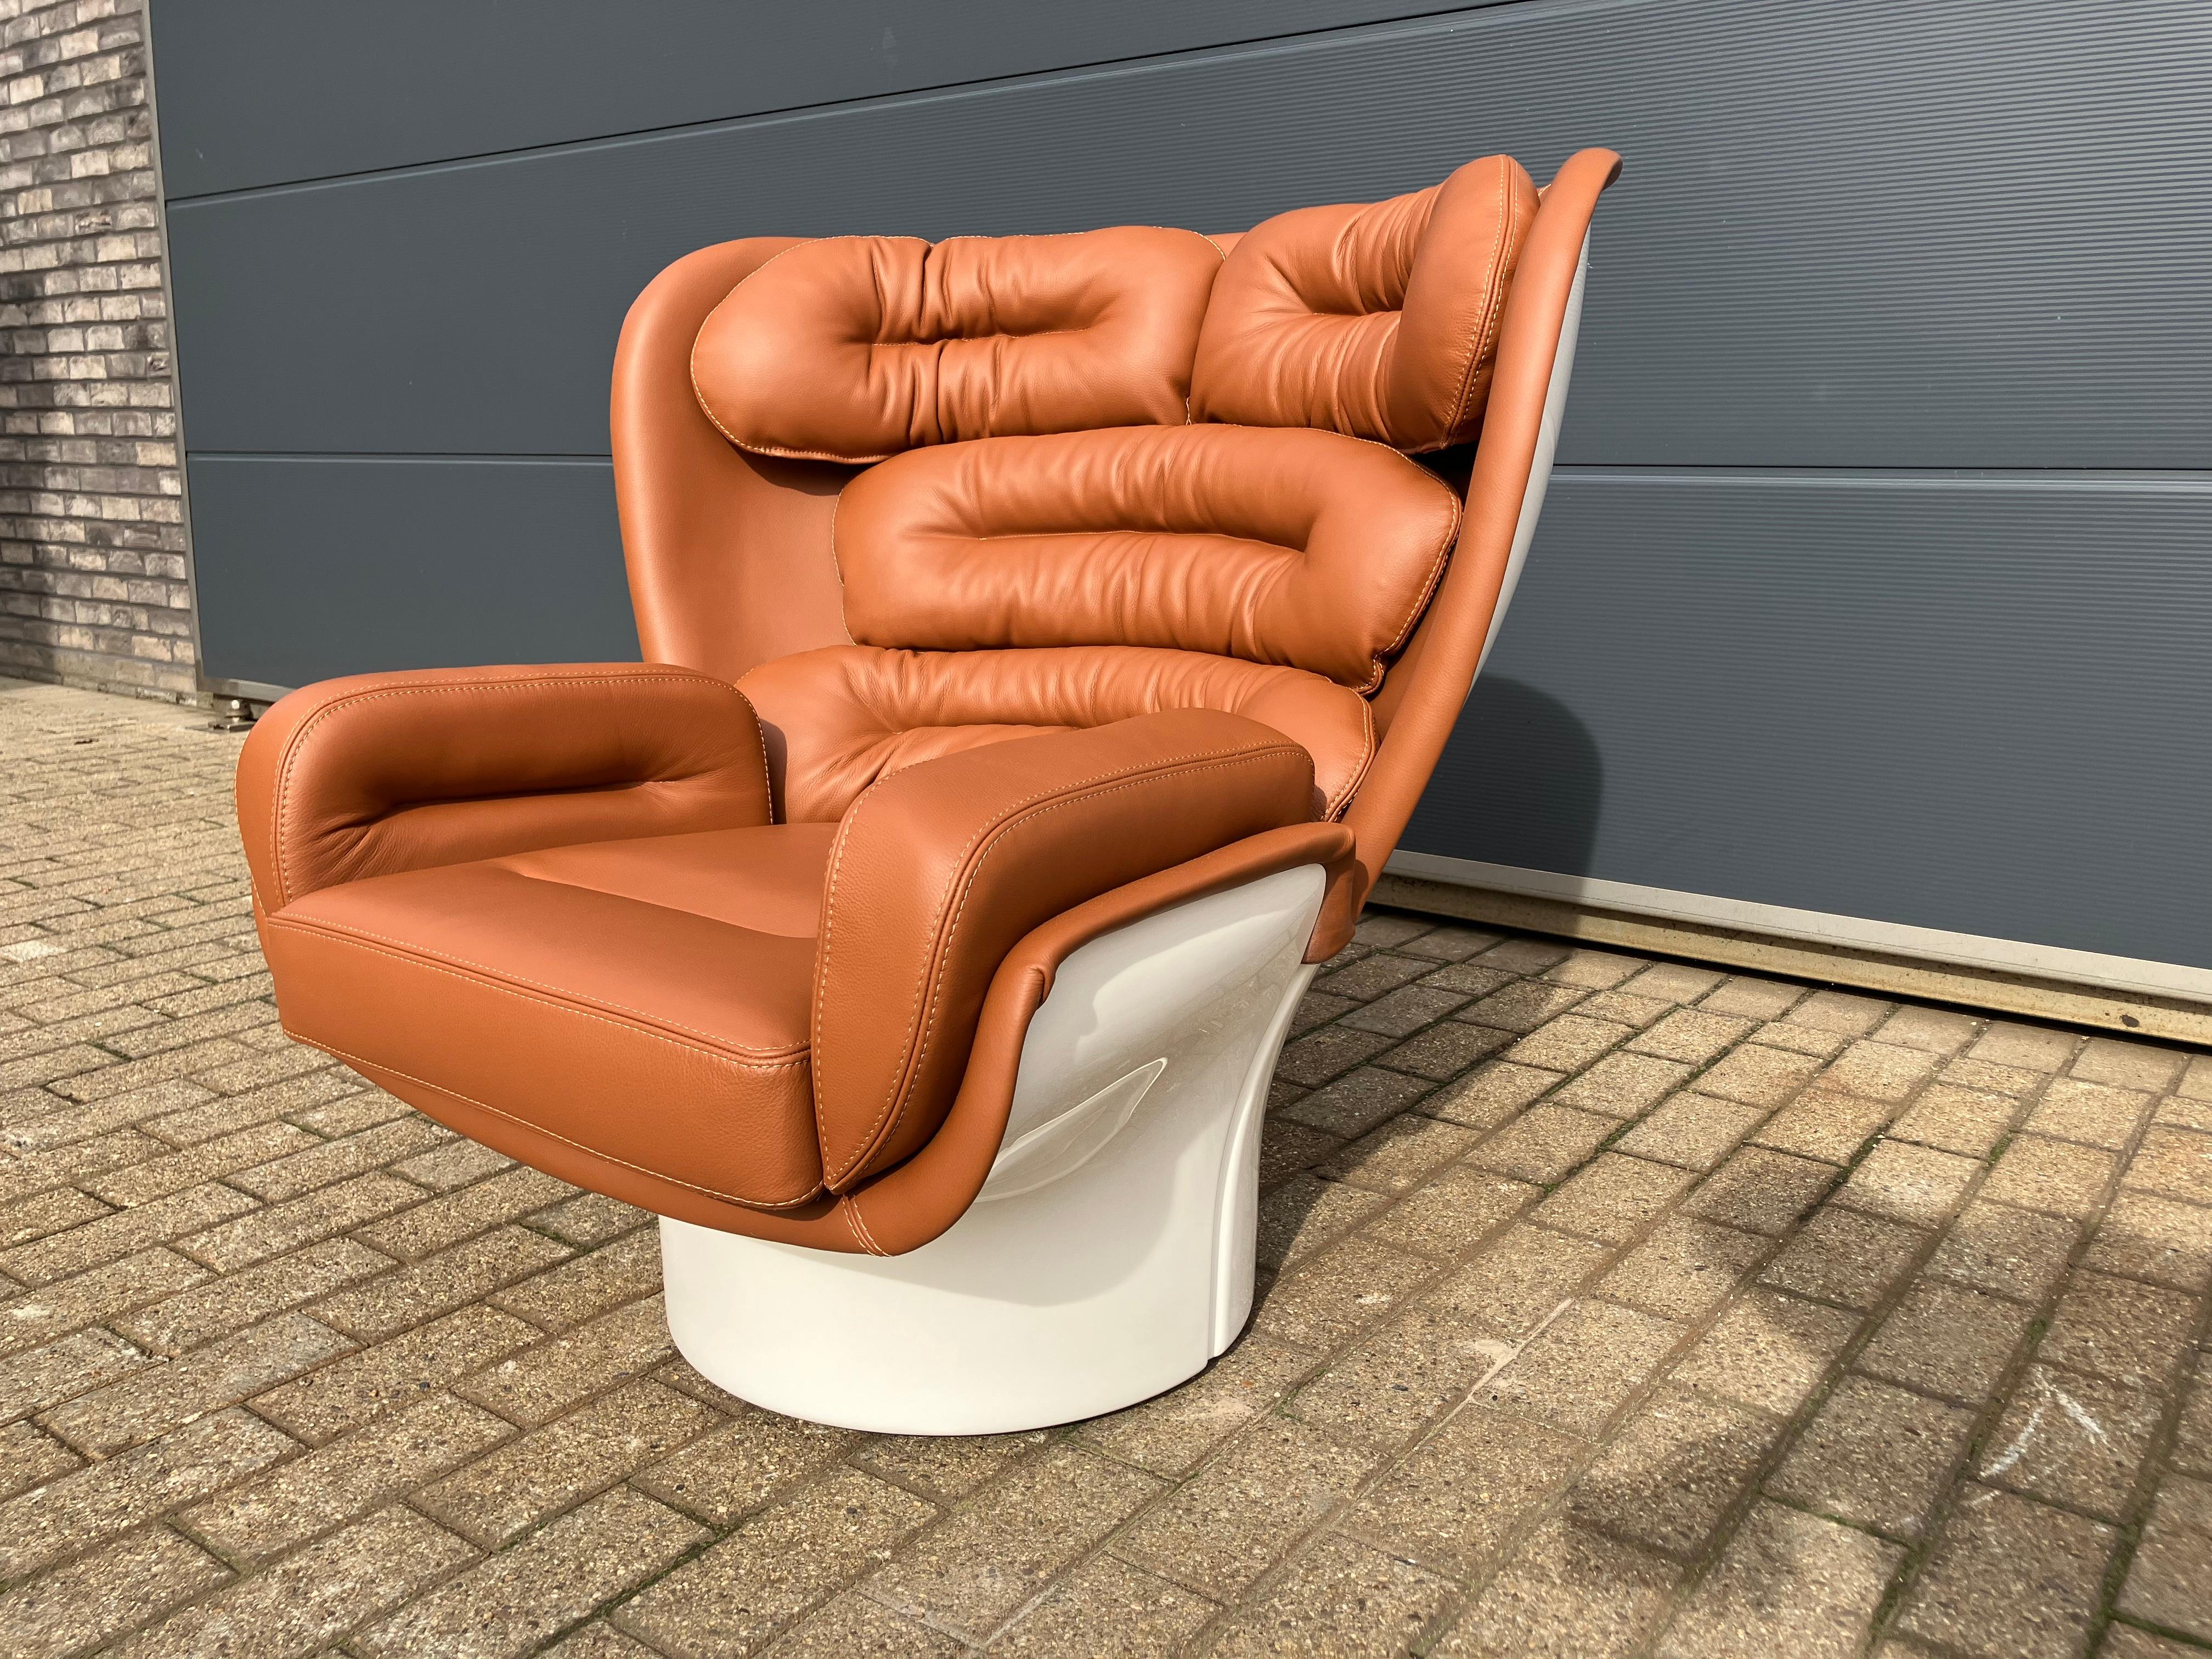 In impeccable NEW condition!

Iconic Space Age classics: Elda Chair by Joe Colombo (1963- Italy).
360 degree rotatable base (swivel).

With certificate of authenticity and warranty!

Cognac leather with a beautiful grain of the highest